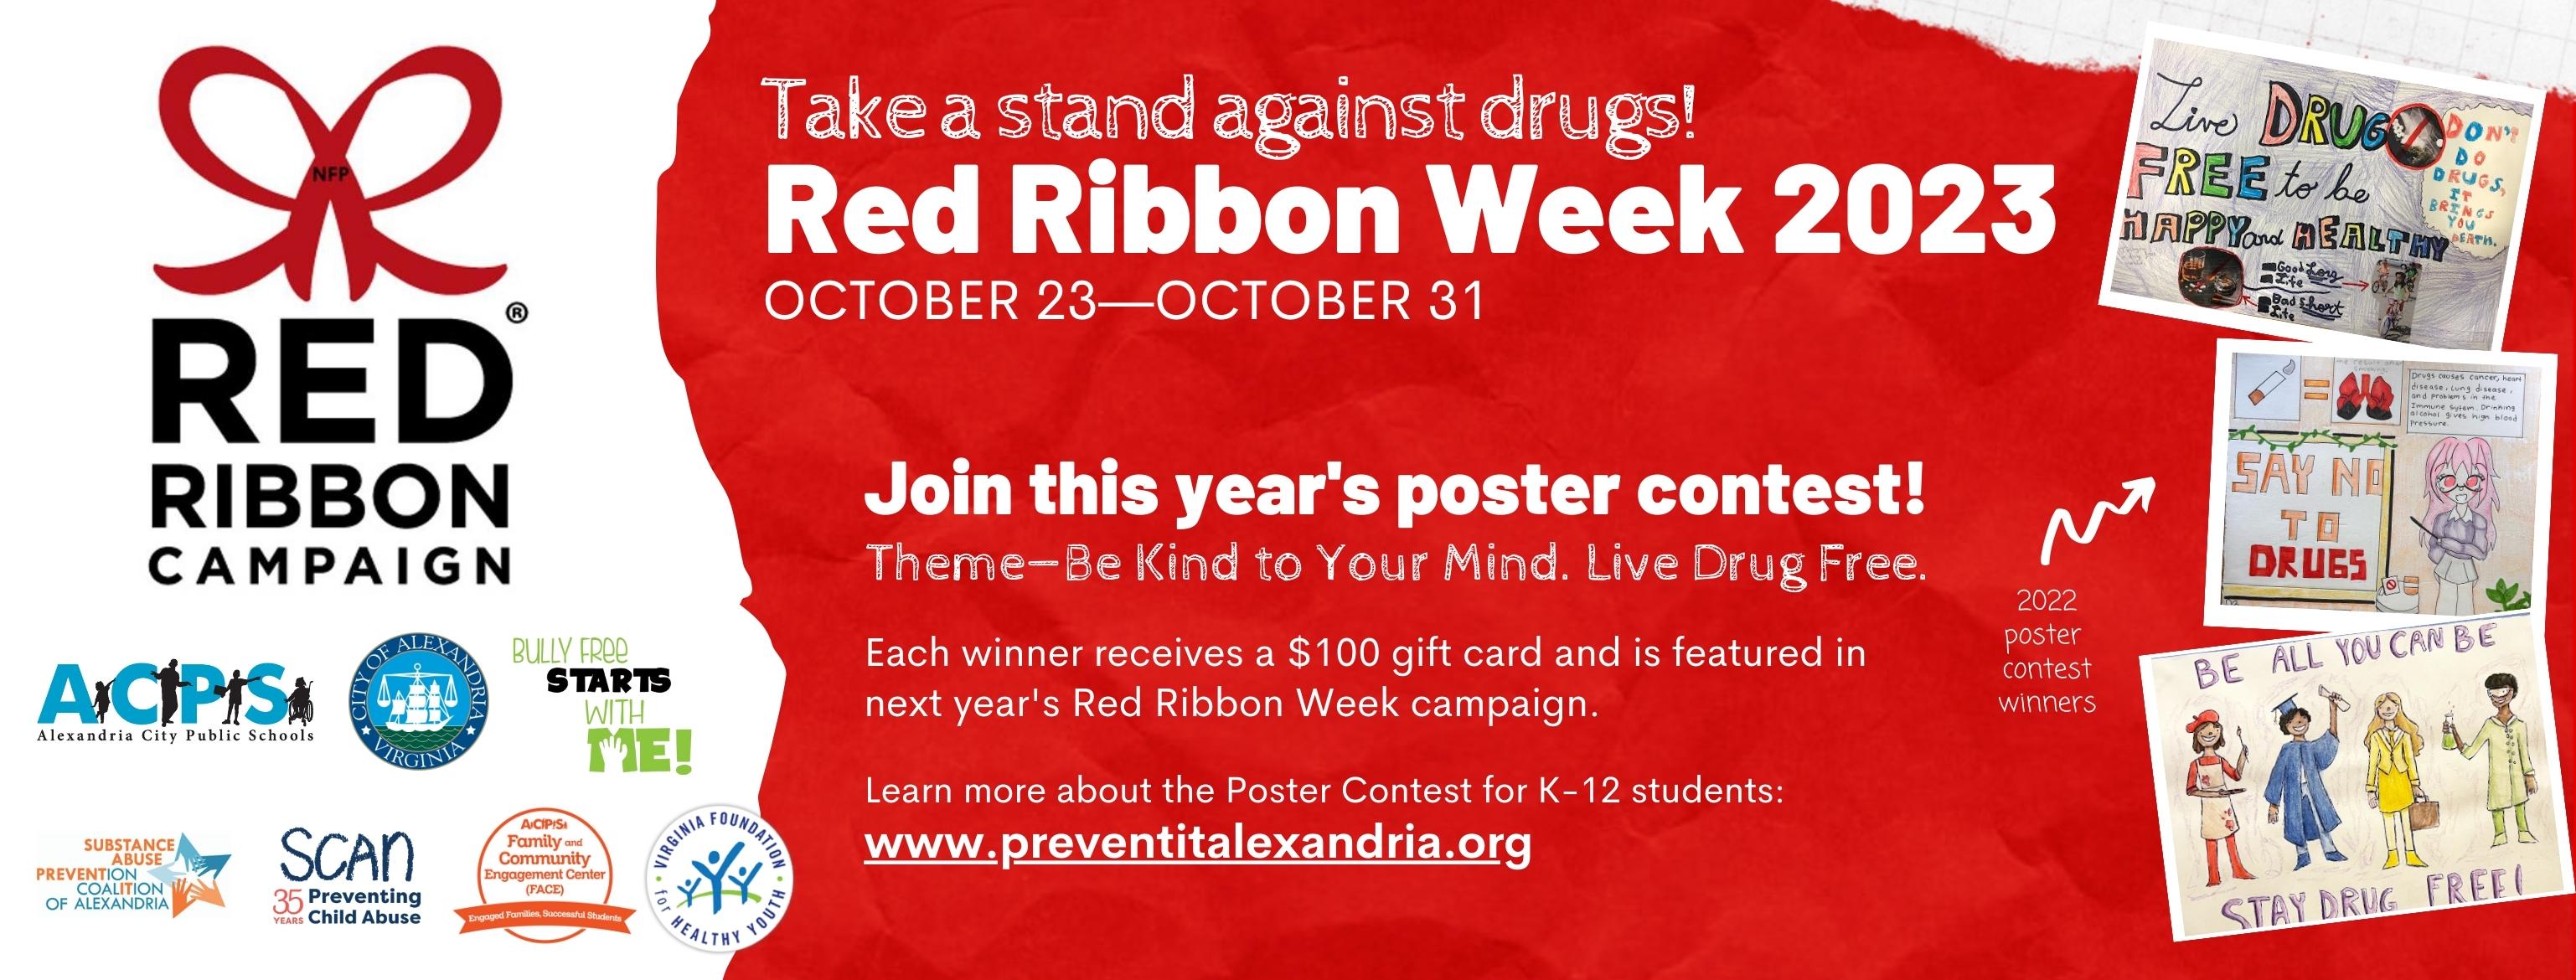 Enter the Red Ribbon Week poster contest